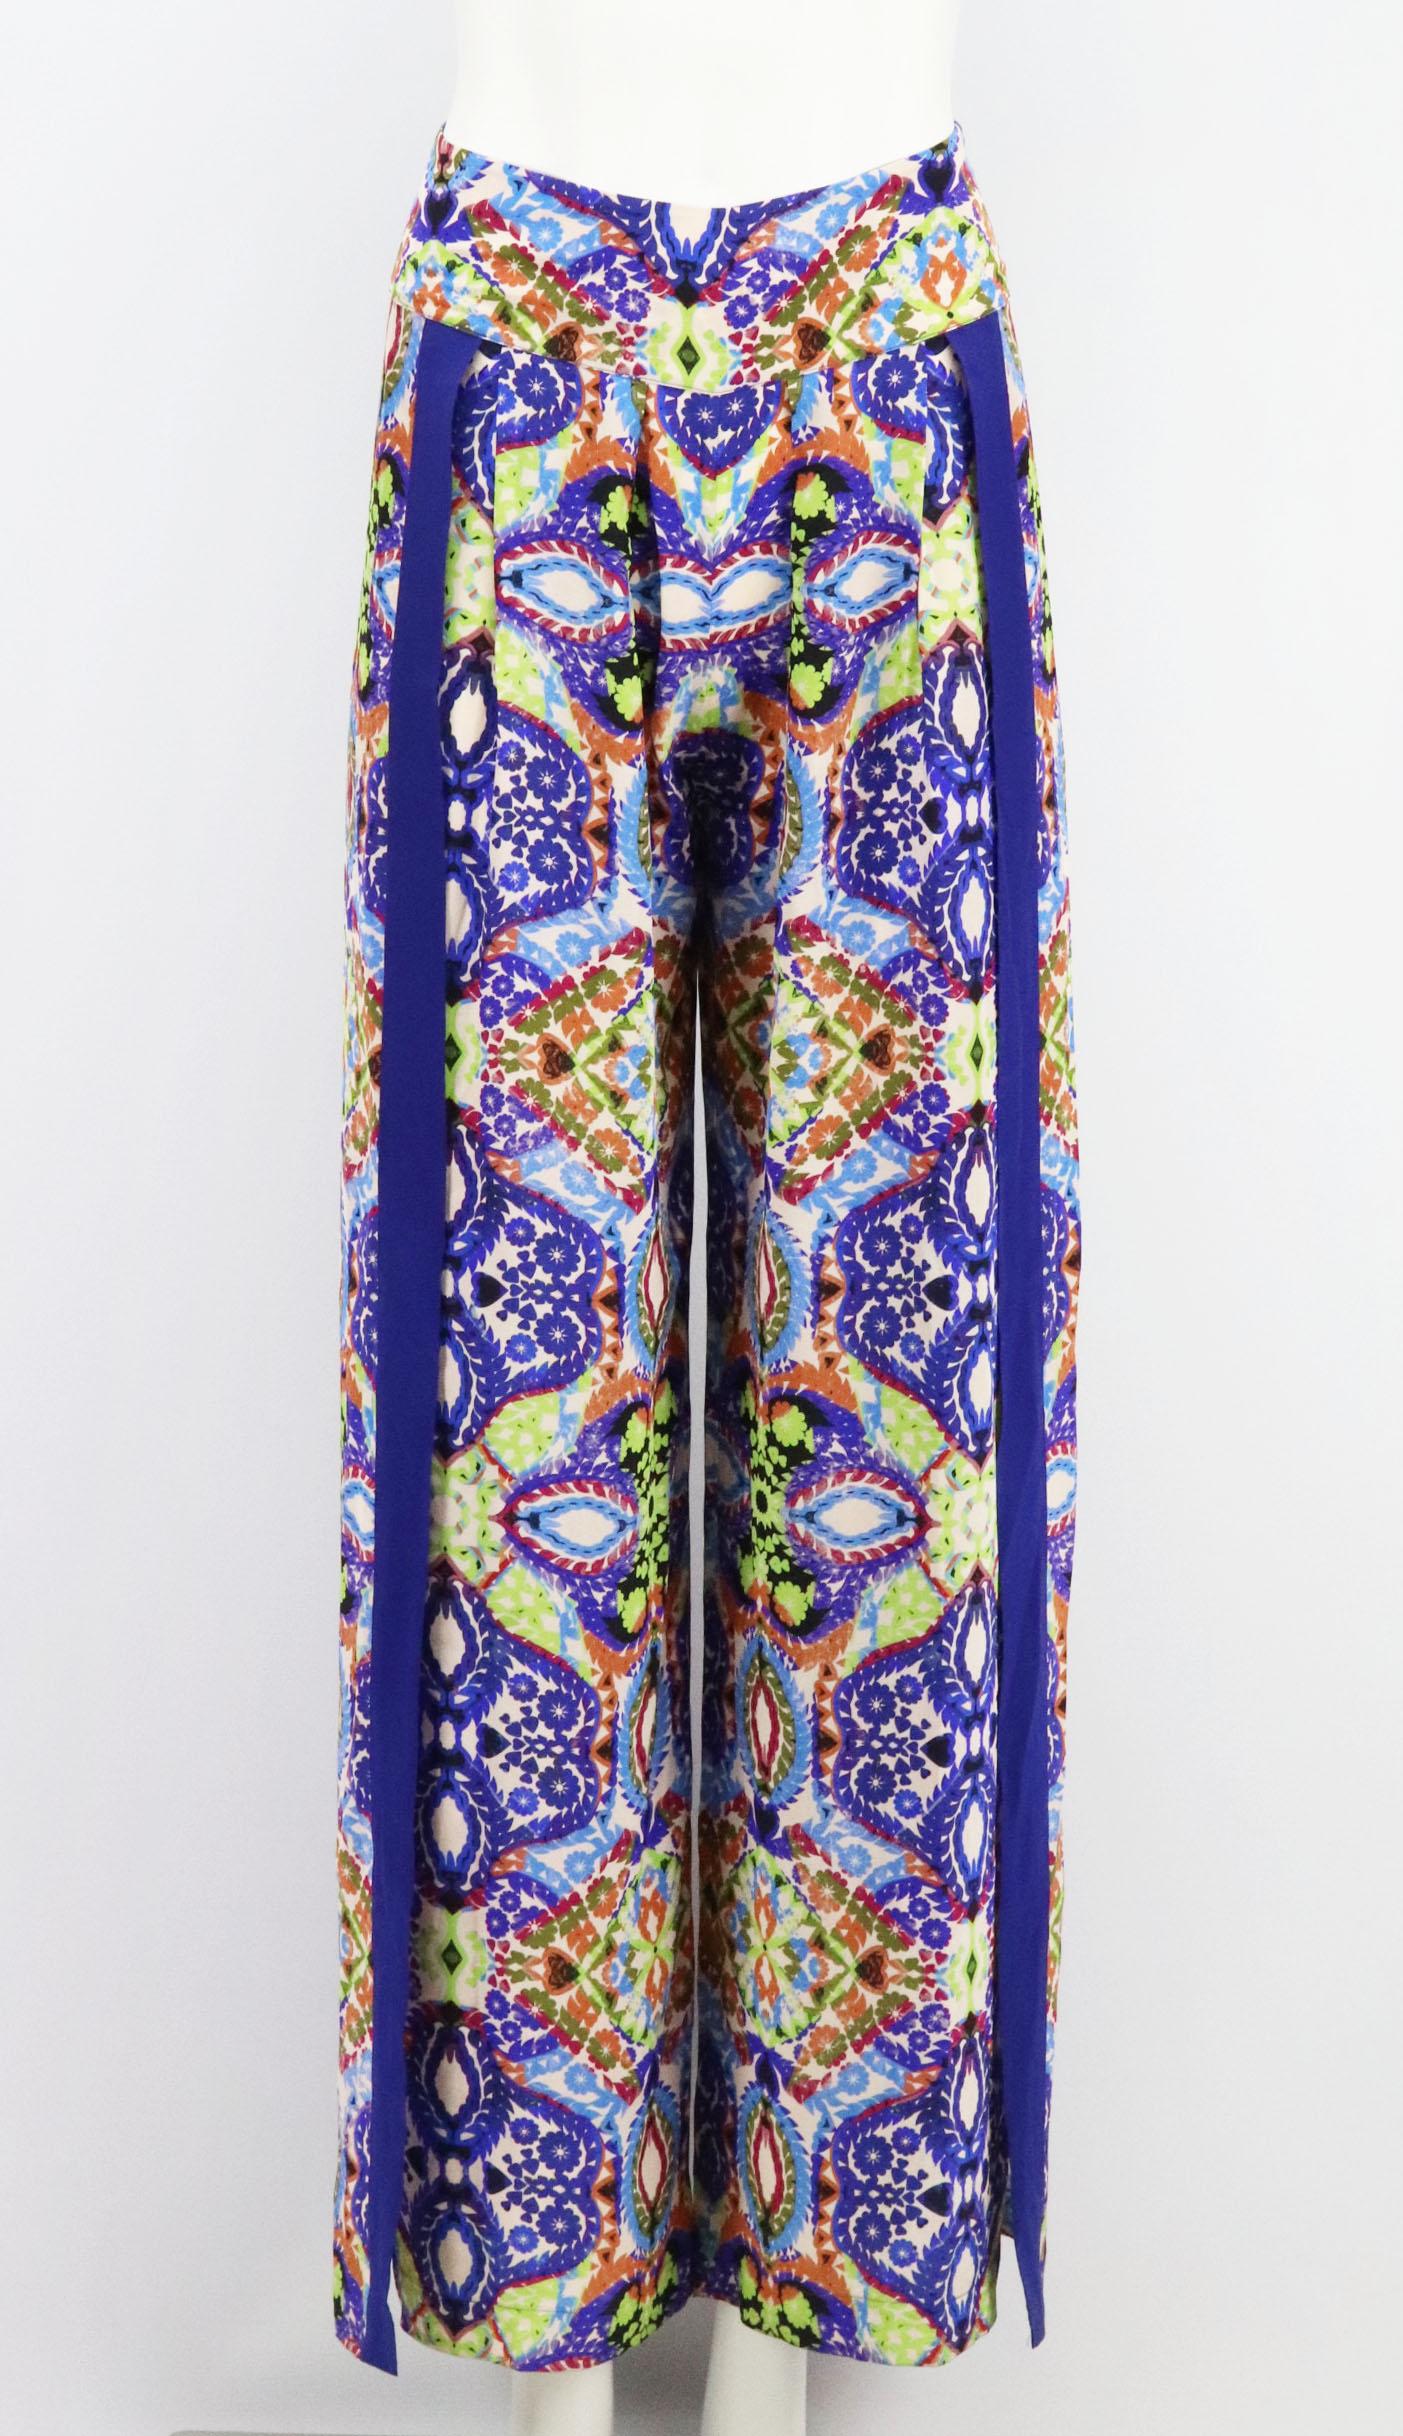 These pants by Matthew Williamson Escape are suitable for both after-dark dinners and adding a joyful print to your beach look, they're made from lustrous silk and have high side splits further the fluidity of the wide legs.
Multicoloured